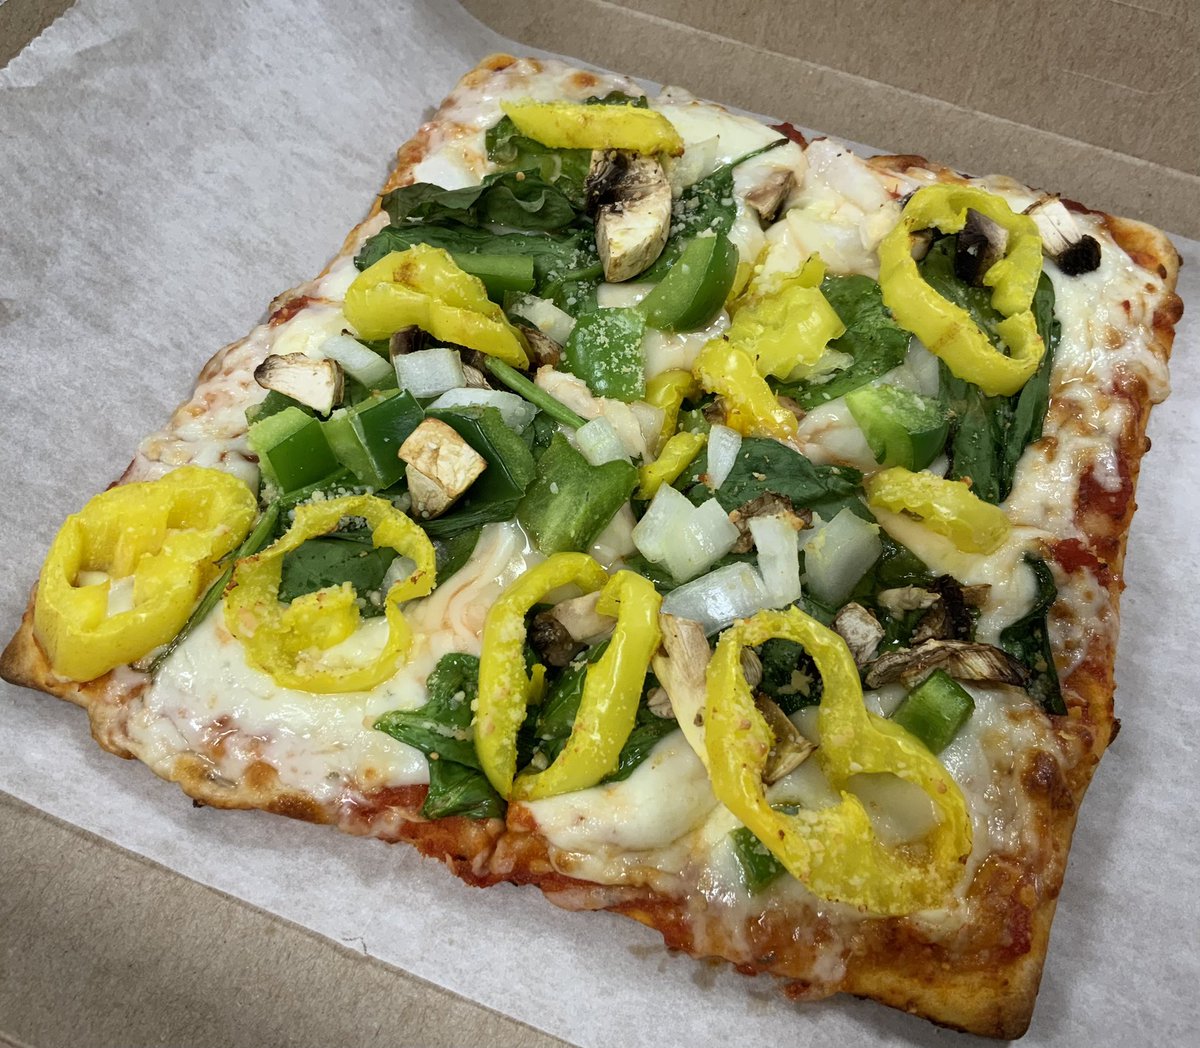 Happy Summer Solstice! Celebrate with a Veggie Pizza today at Perksburgh Cafe- our flatbread crust with red sauce & flavorful veggies, $6.95. Our traditional pizza choices are also available. Call ahead 412-474-8737. Lunch: 1100-1300